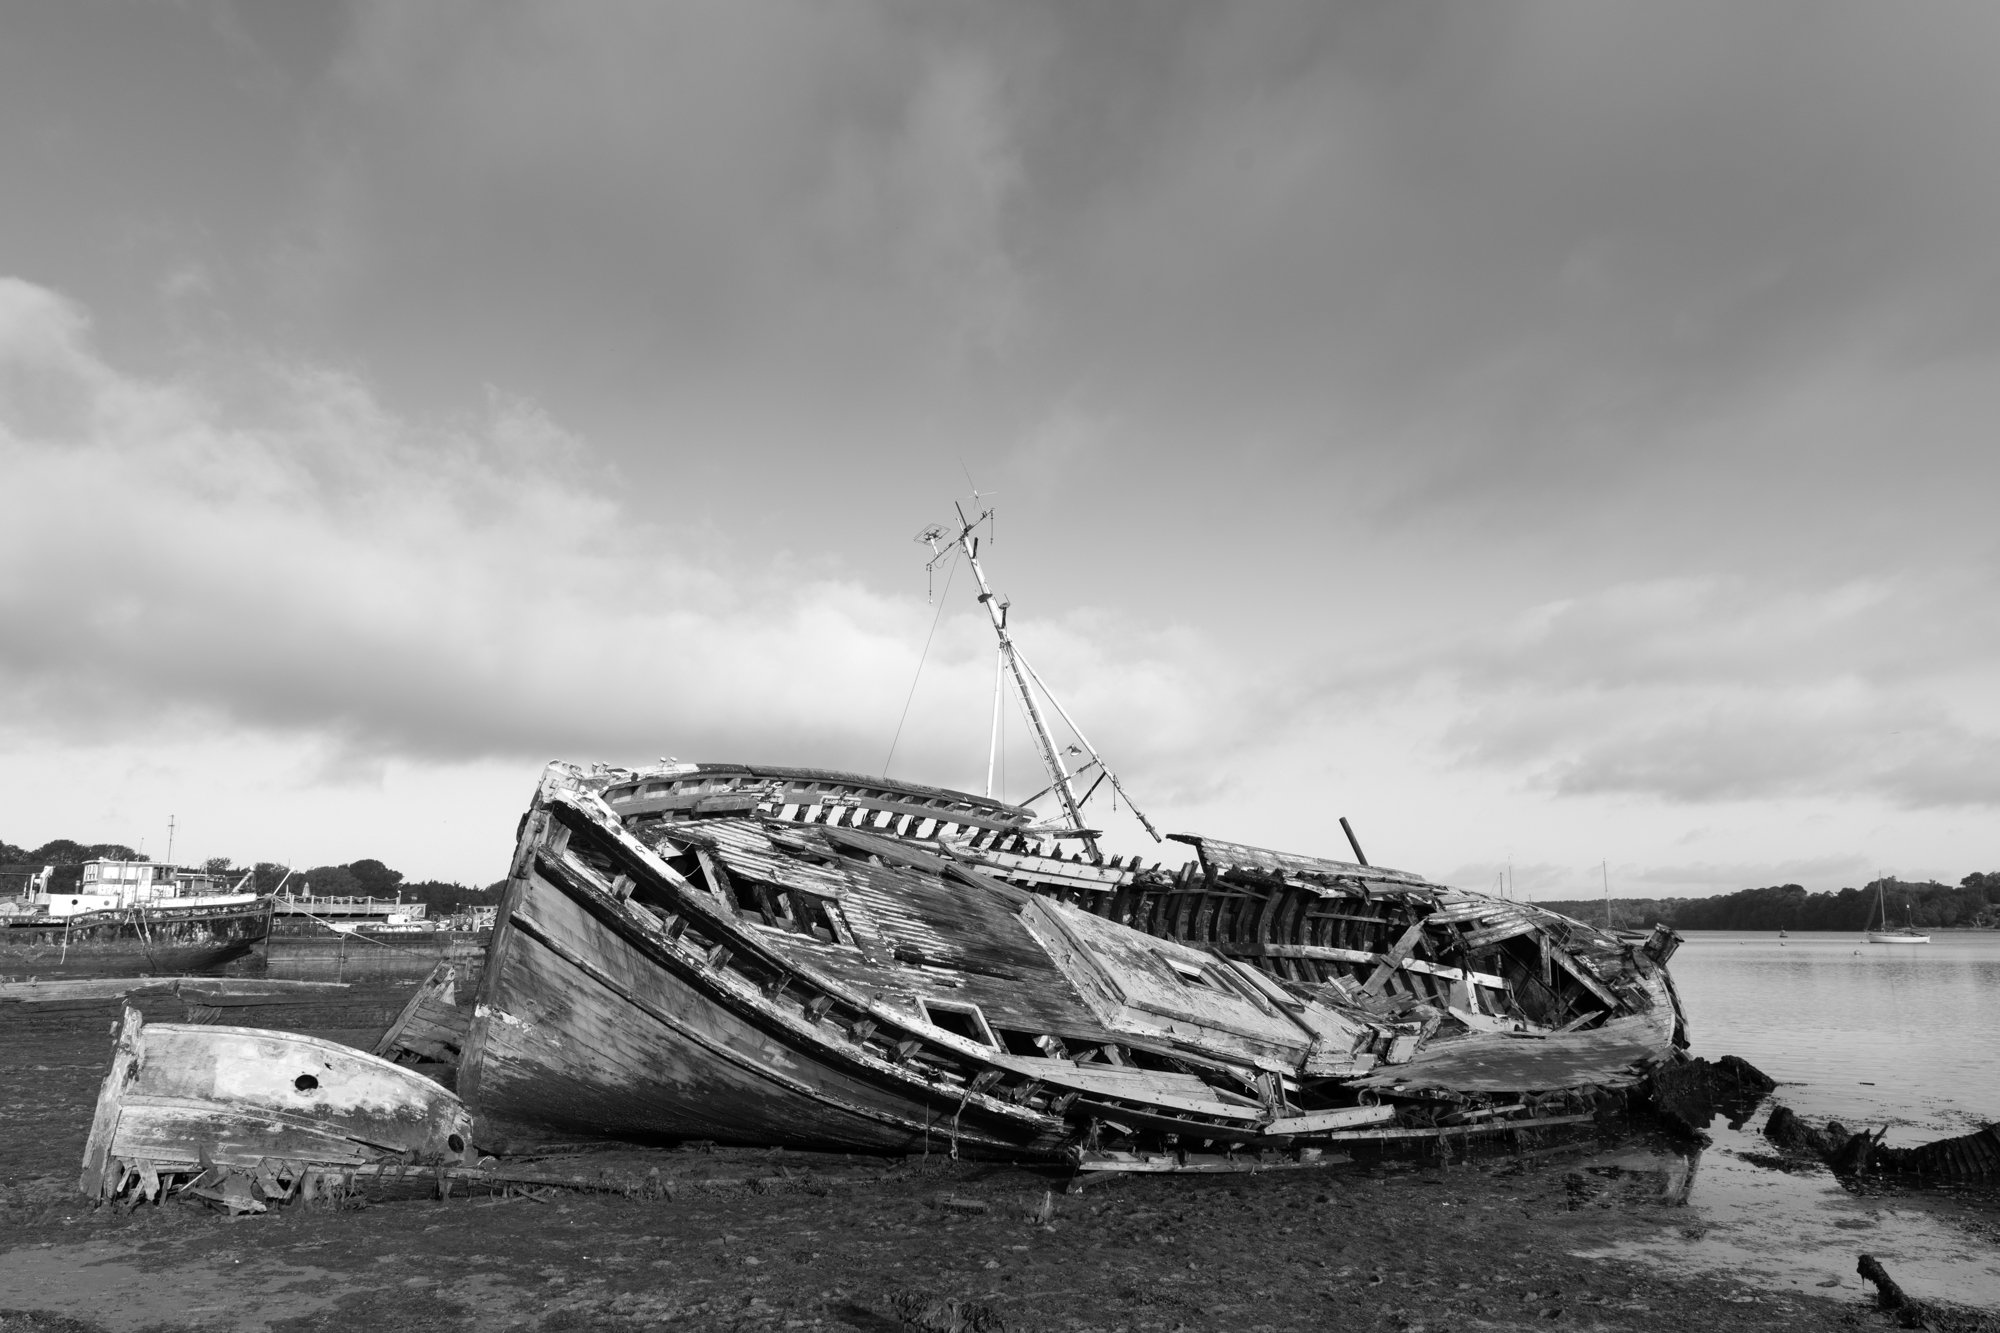 Black & white photo of a derelict boat taken with the Pentax K-3 Mark III Monochrome